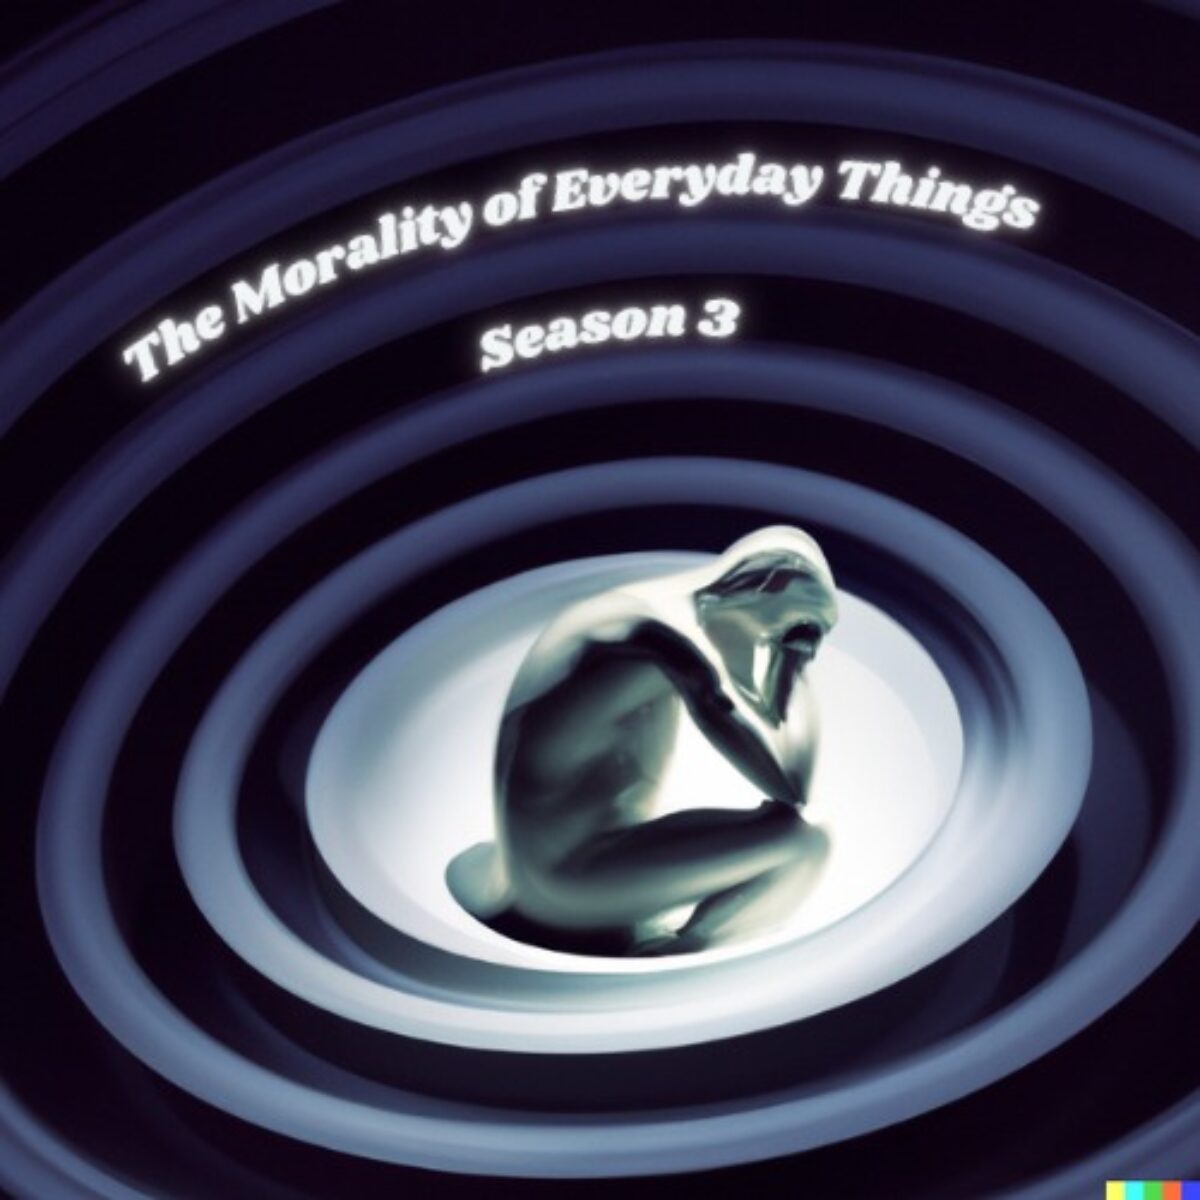 The morality of everyday things